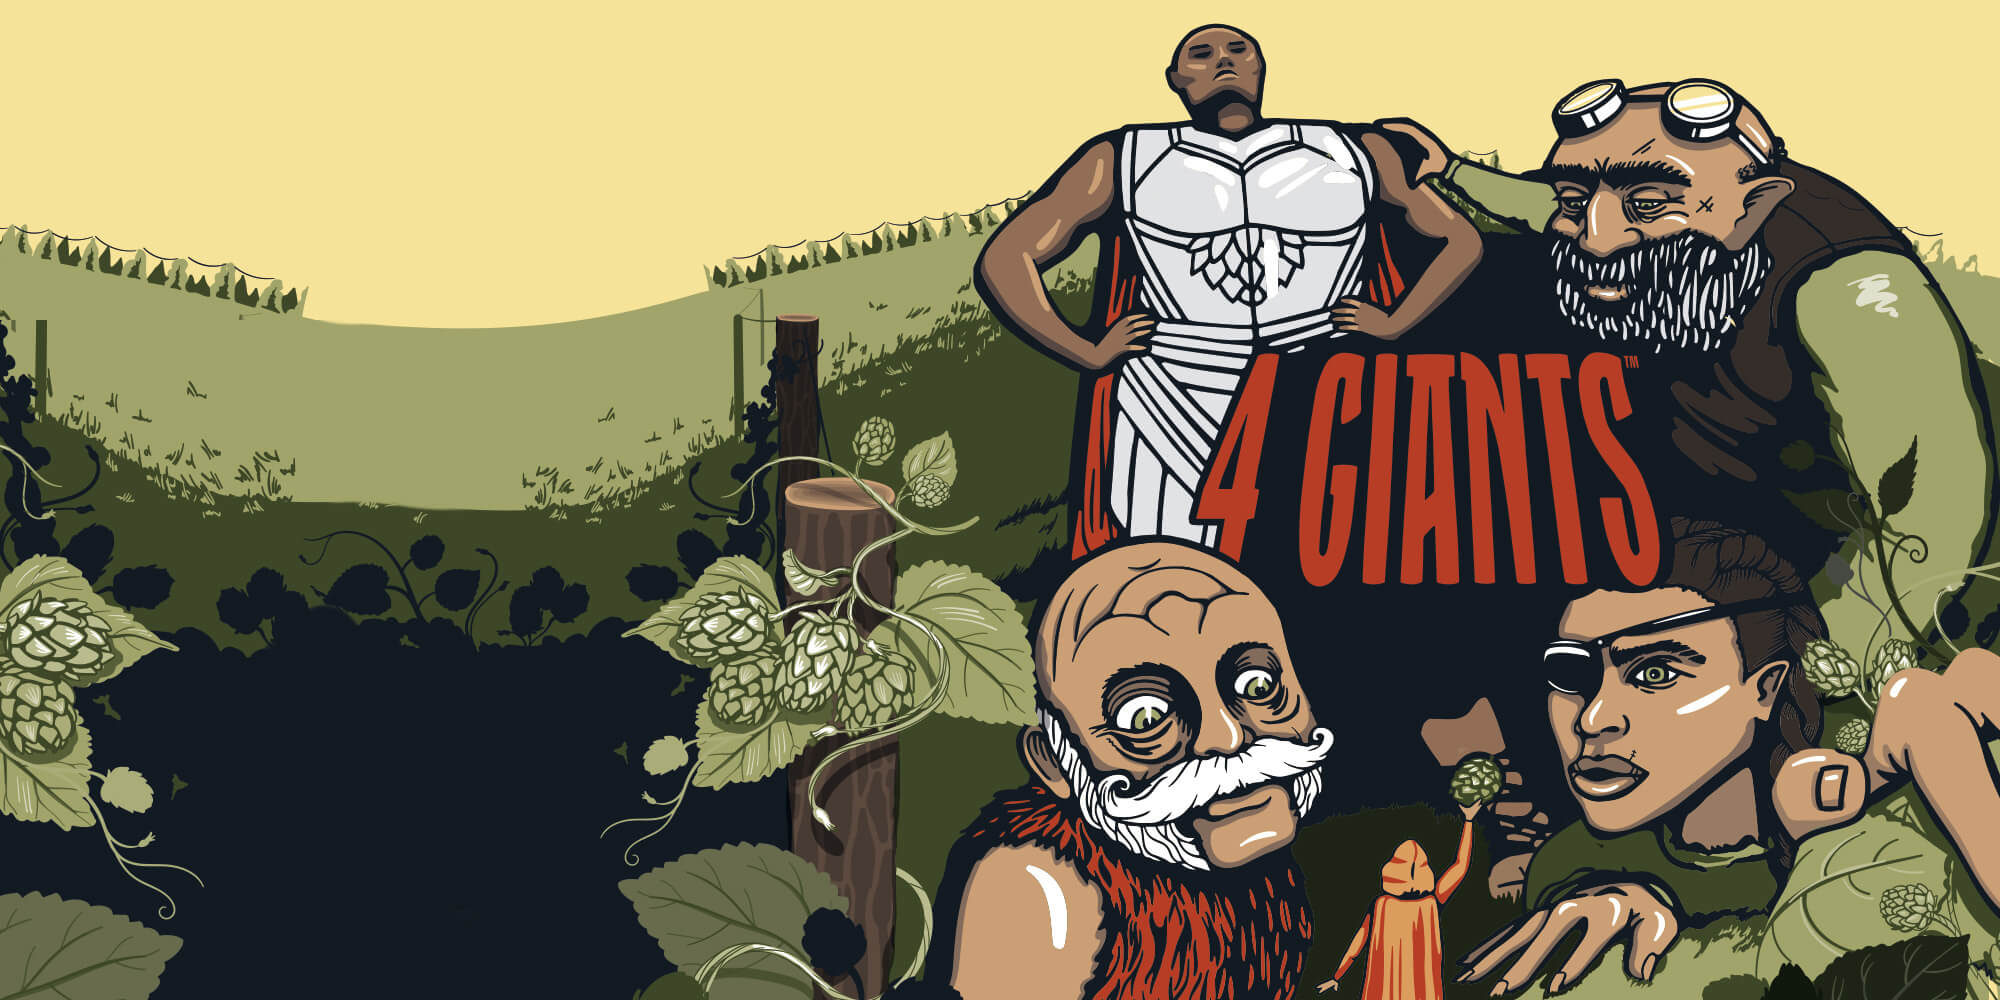 4 Giants Imperial IPA illustration